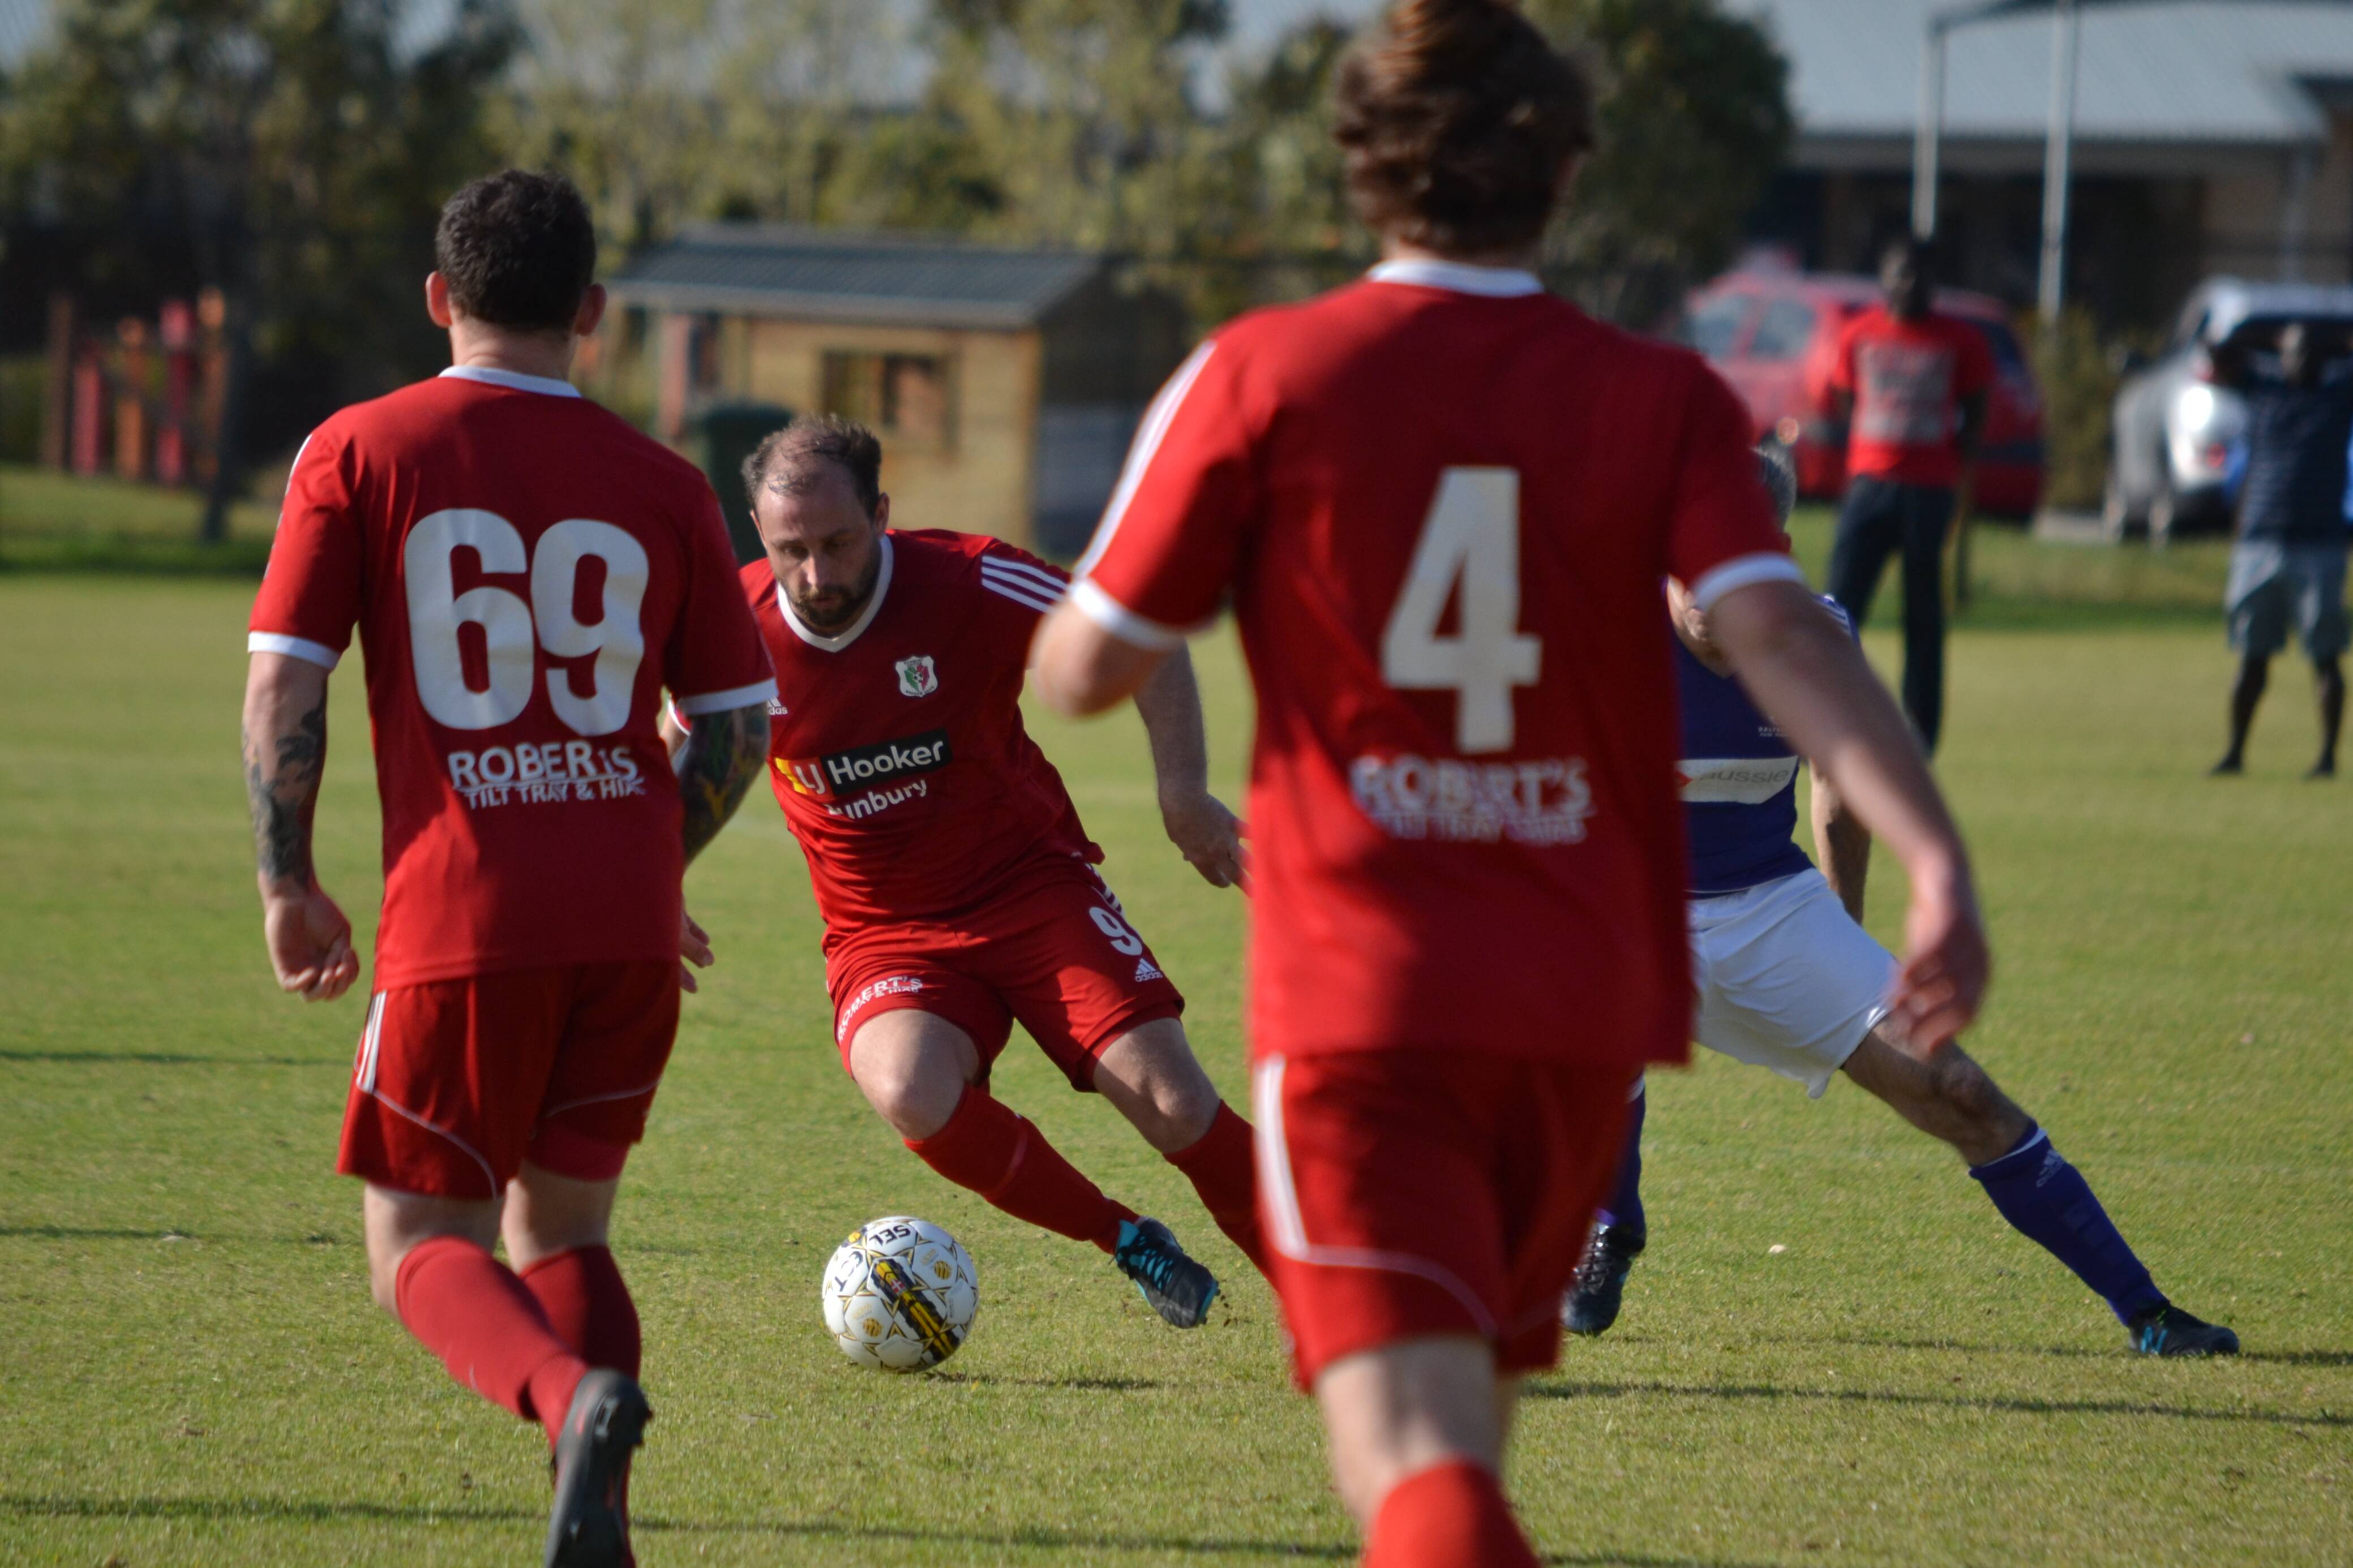 Football Margaret River comes home with SWSA premier league titles for both  men's and women's sides